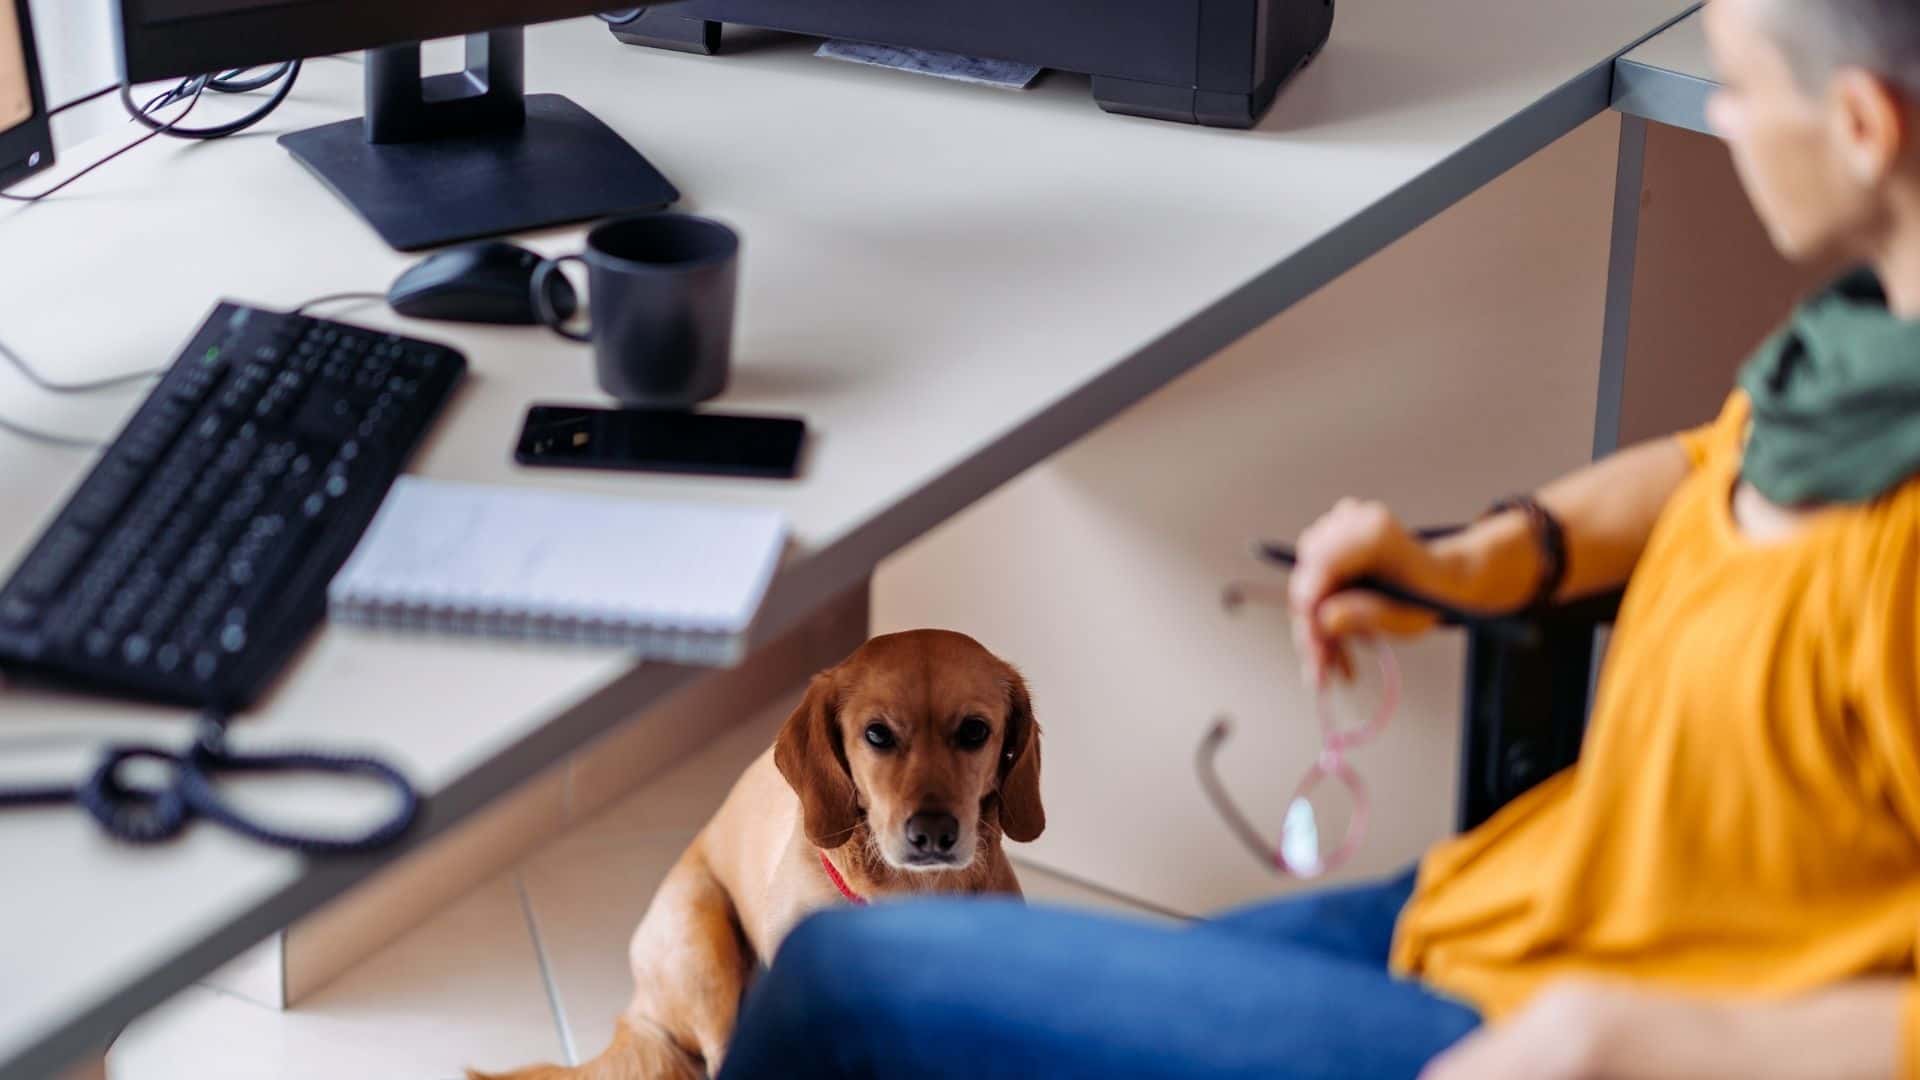 Why Is My Dog Under Desk | Guide